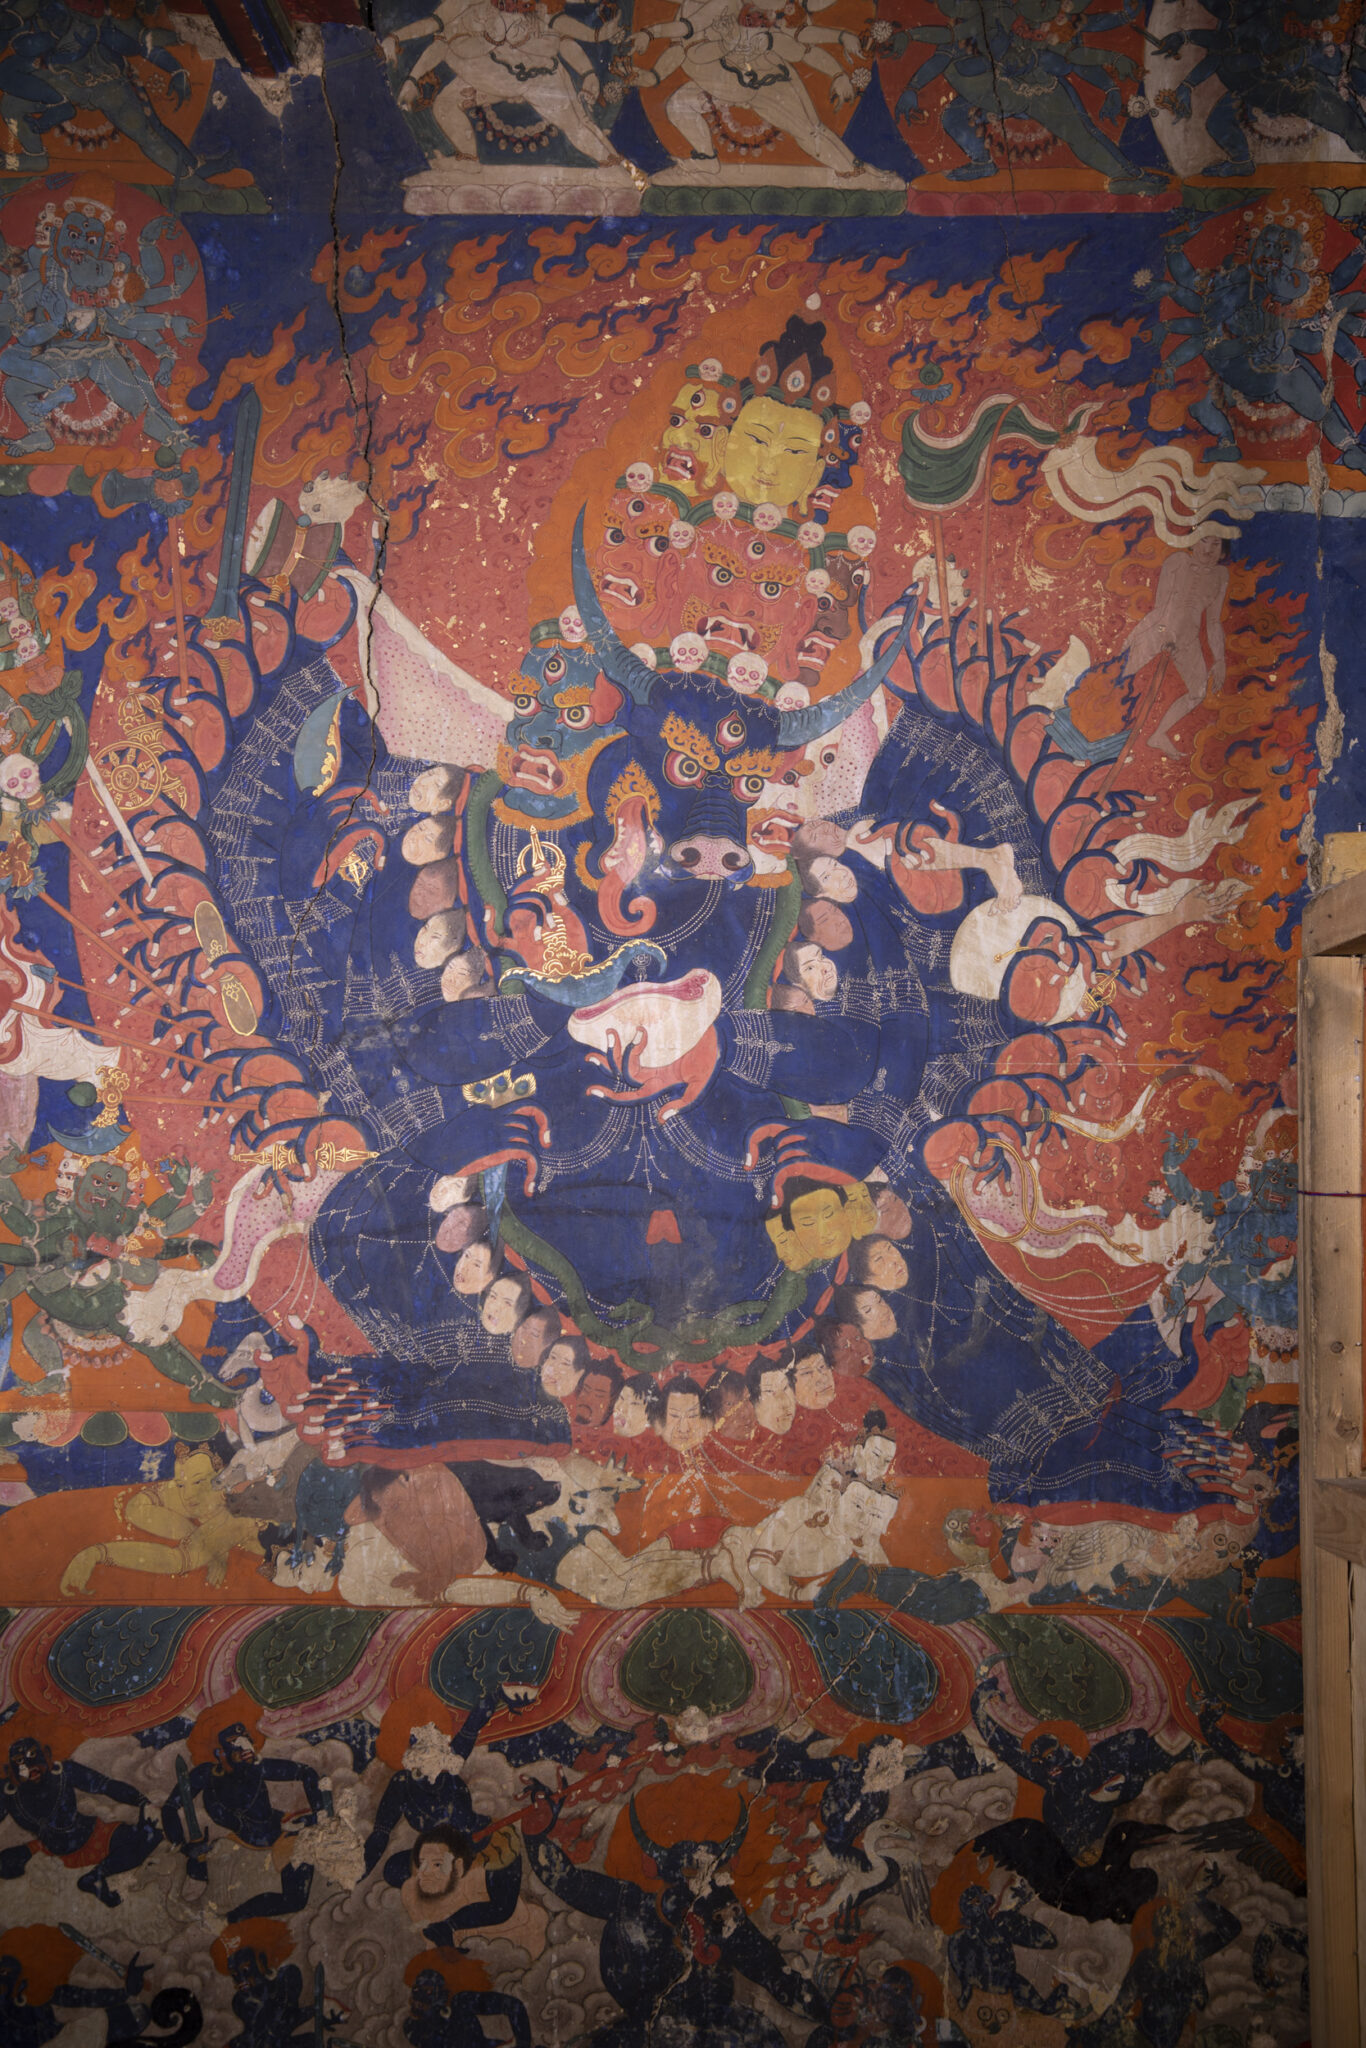 Blue-skinned, many-armed, cow- and human-headed deity in dynamic pose before fiery nimbus